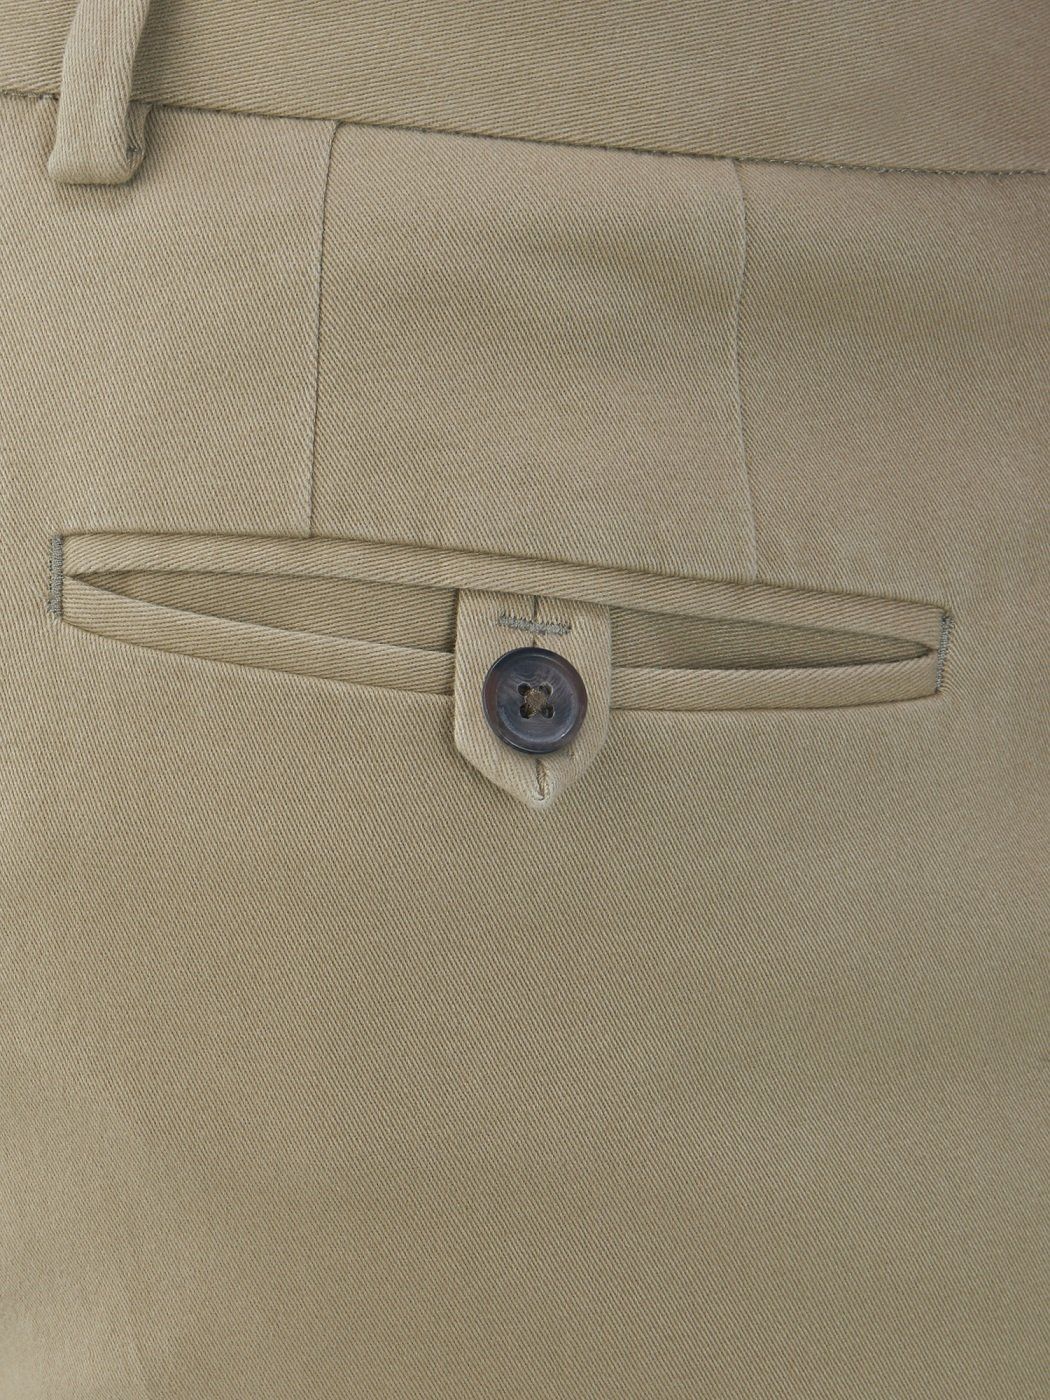 Skopes Antibes Tailored Chinos In Stone